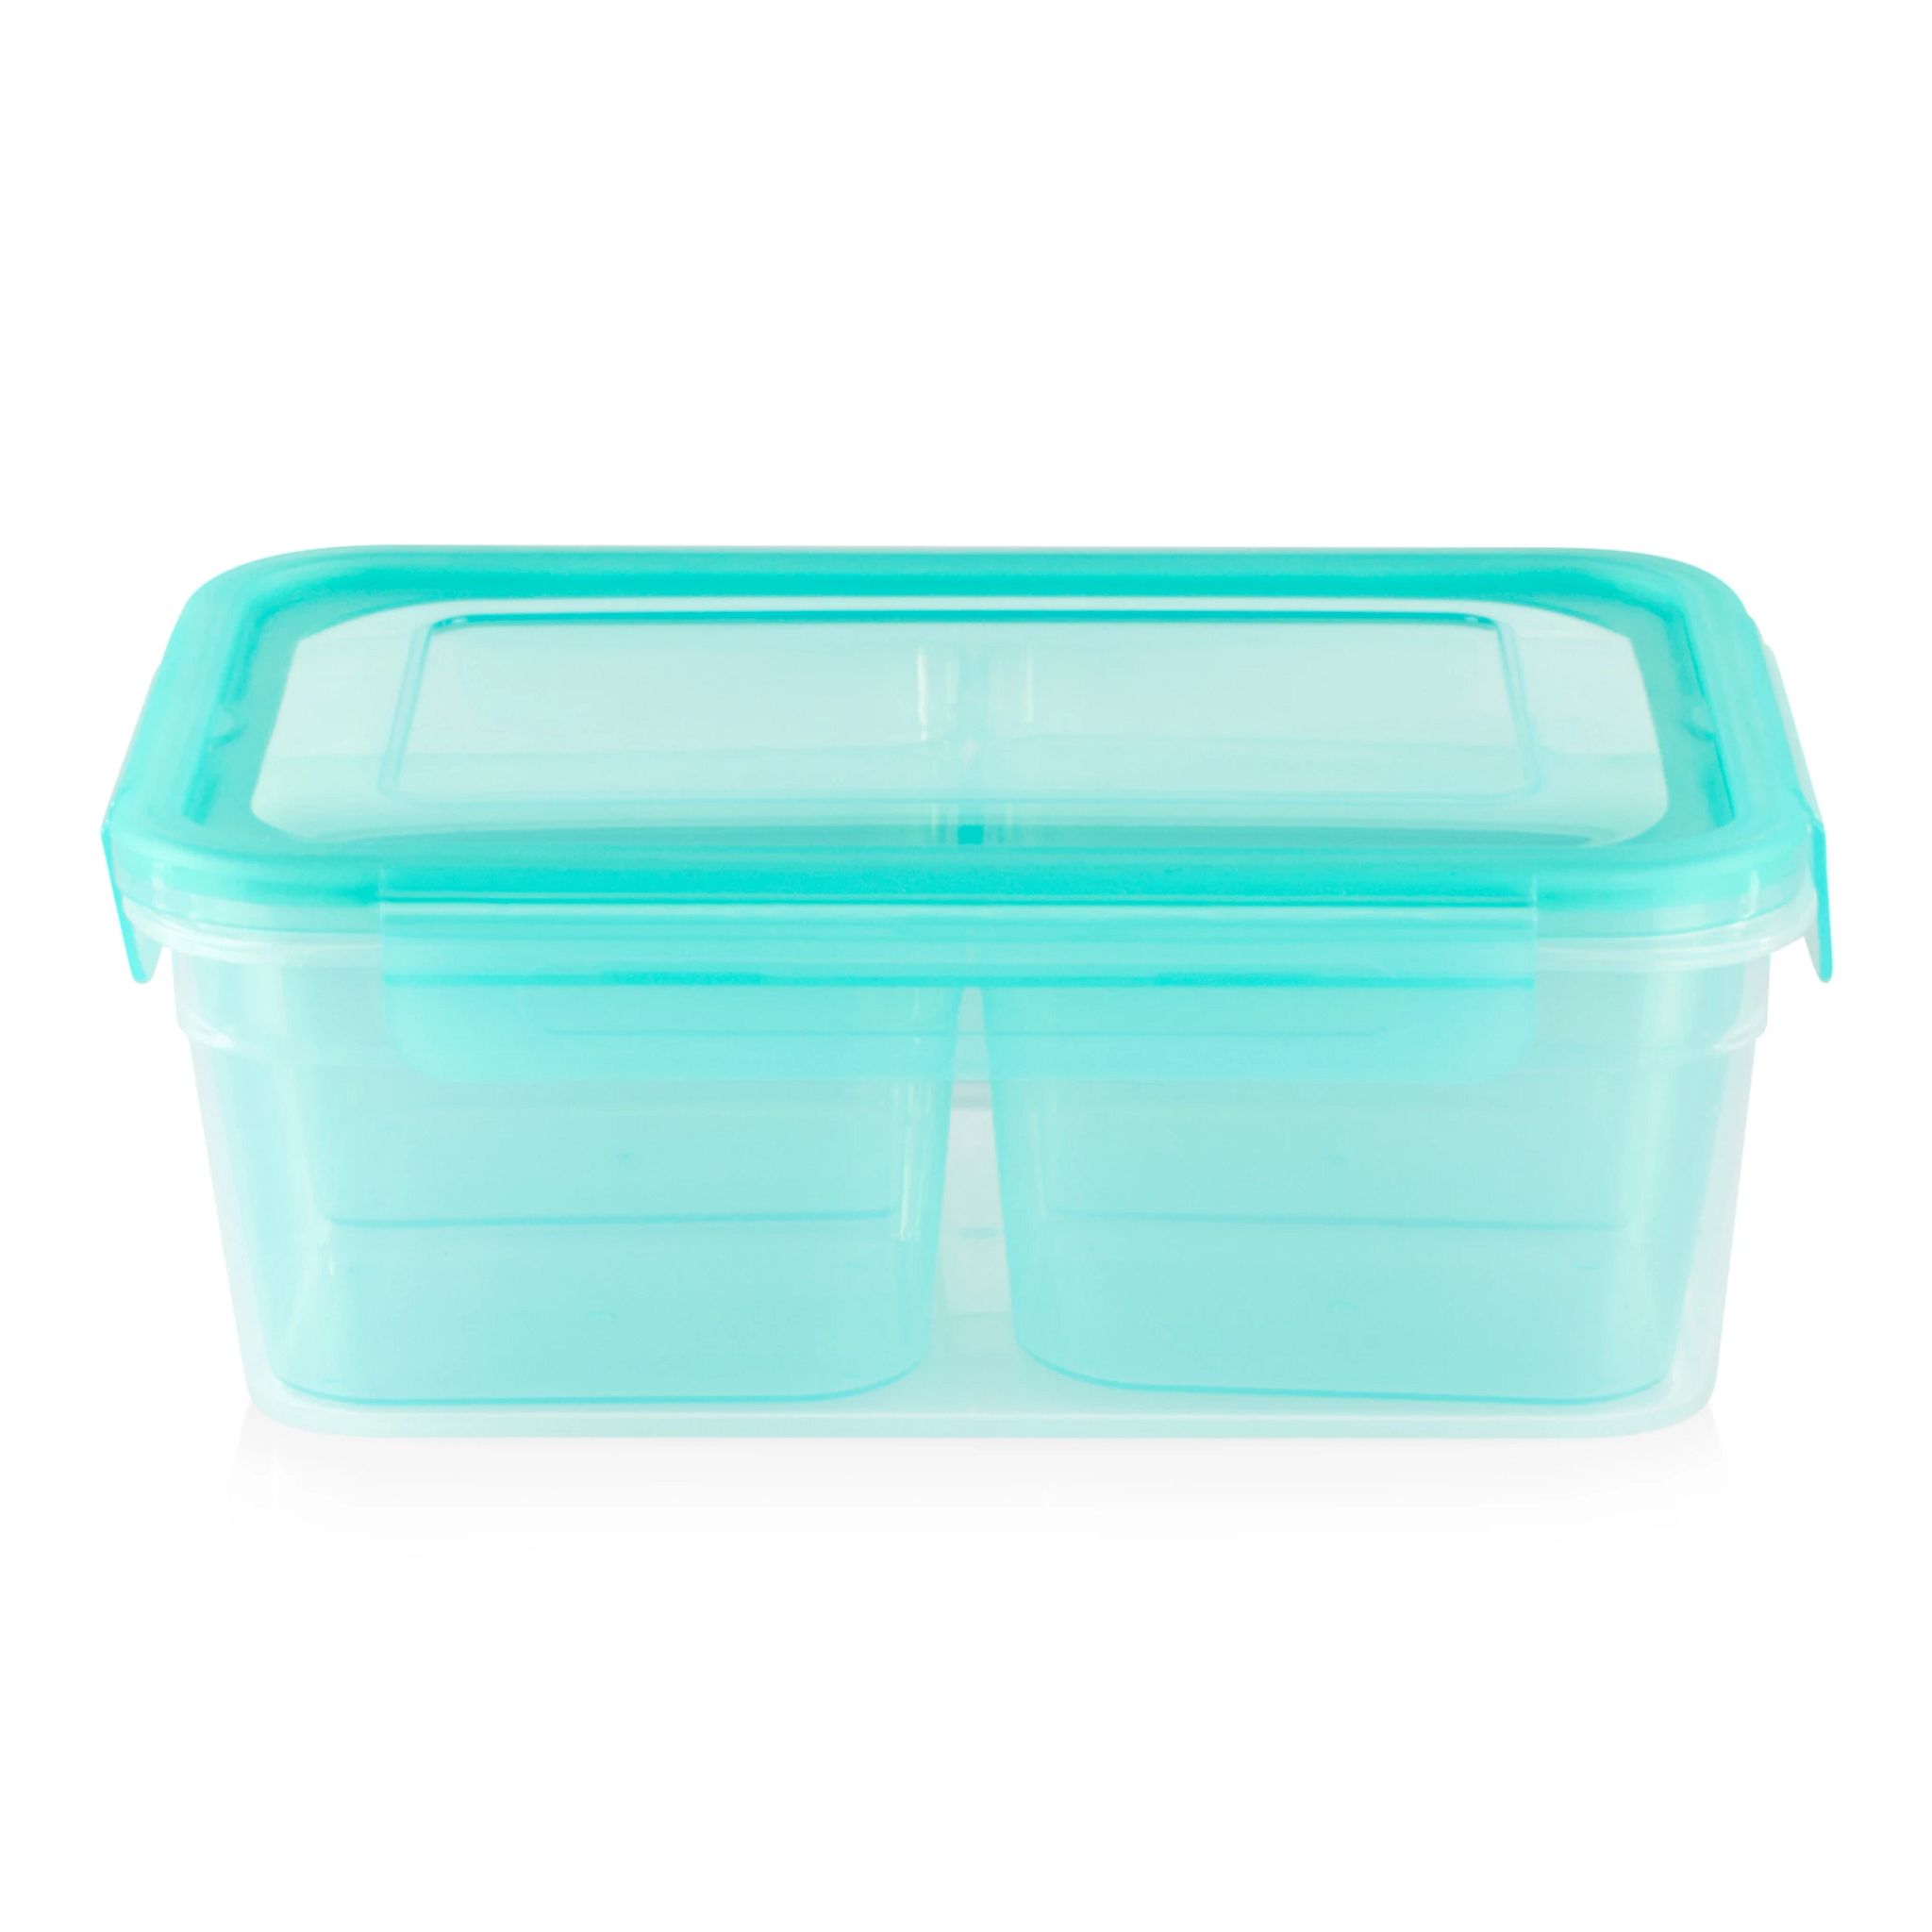 Prep Naturals Meal Prep Containers Review: Great Divided Containers